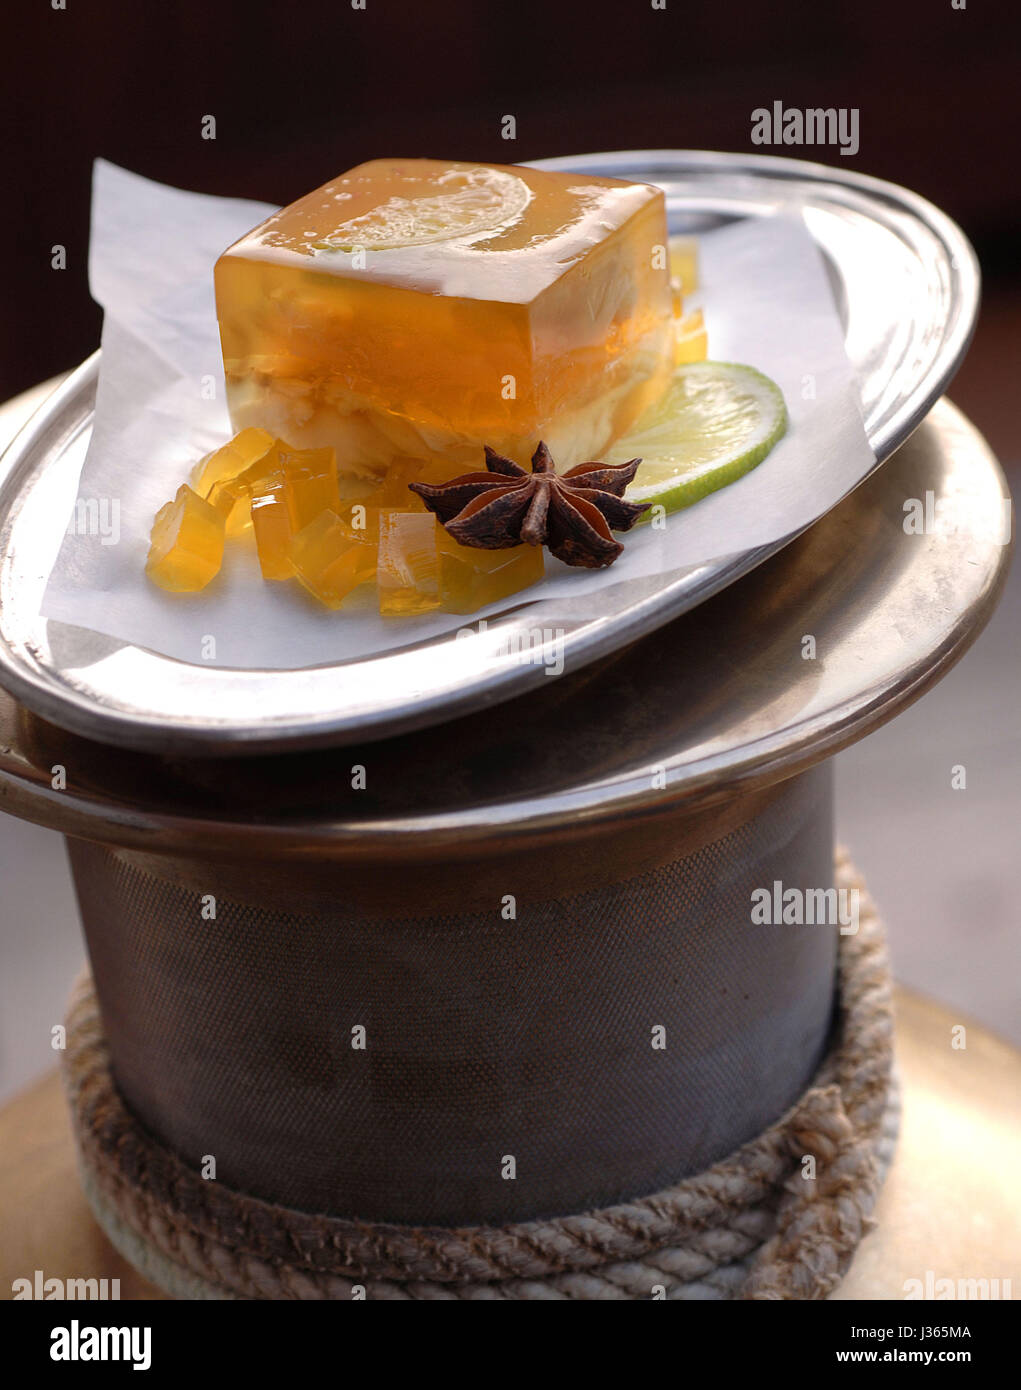 June, welcome on board with the 'Yachting' menu: monk fish medaillons in saffron jelly Stock Photo